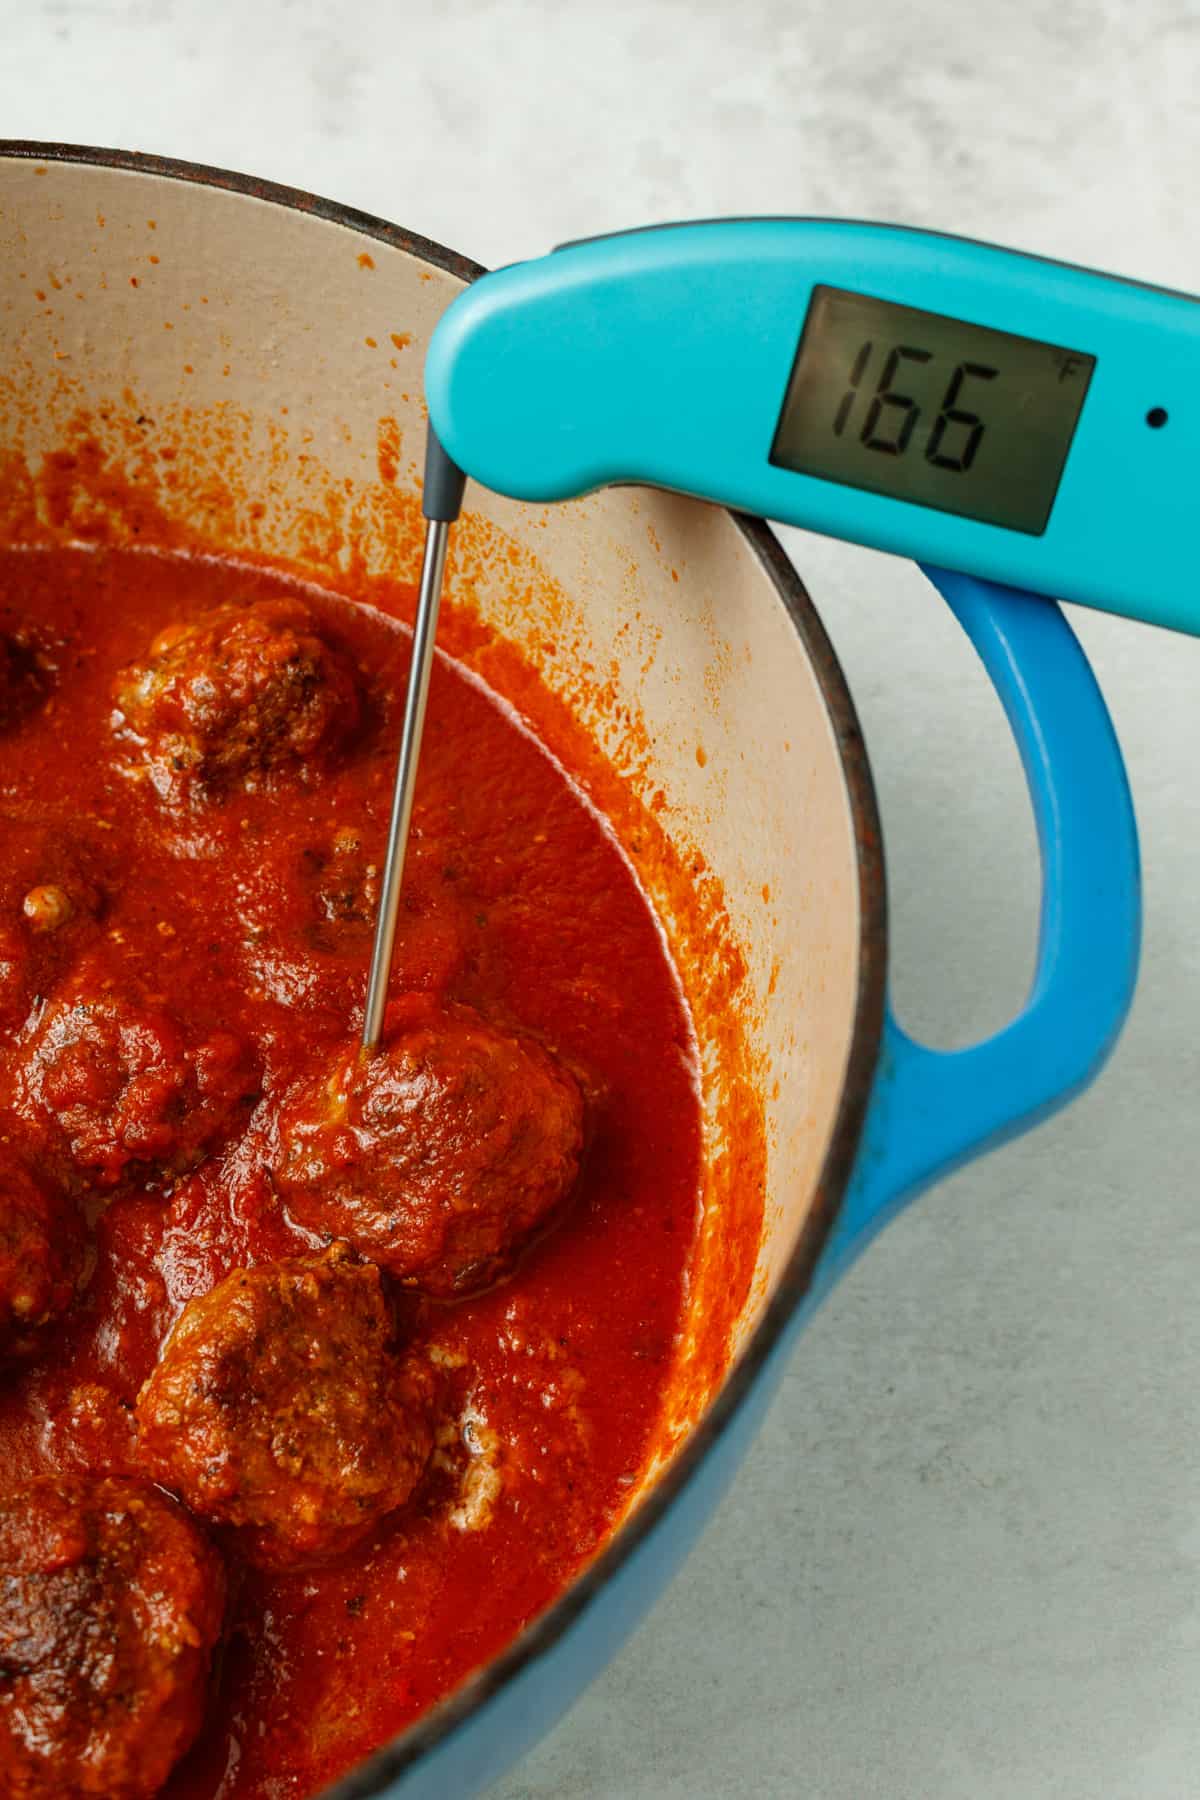 A meat thermometer reading 166F in a meatball. The meatballs are in toamto sauce in a blue dutch oven.